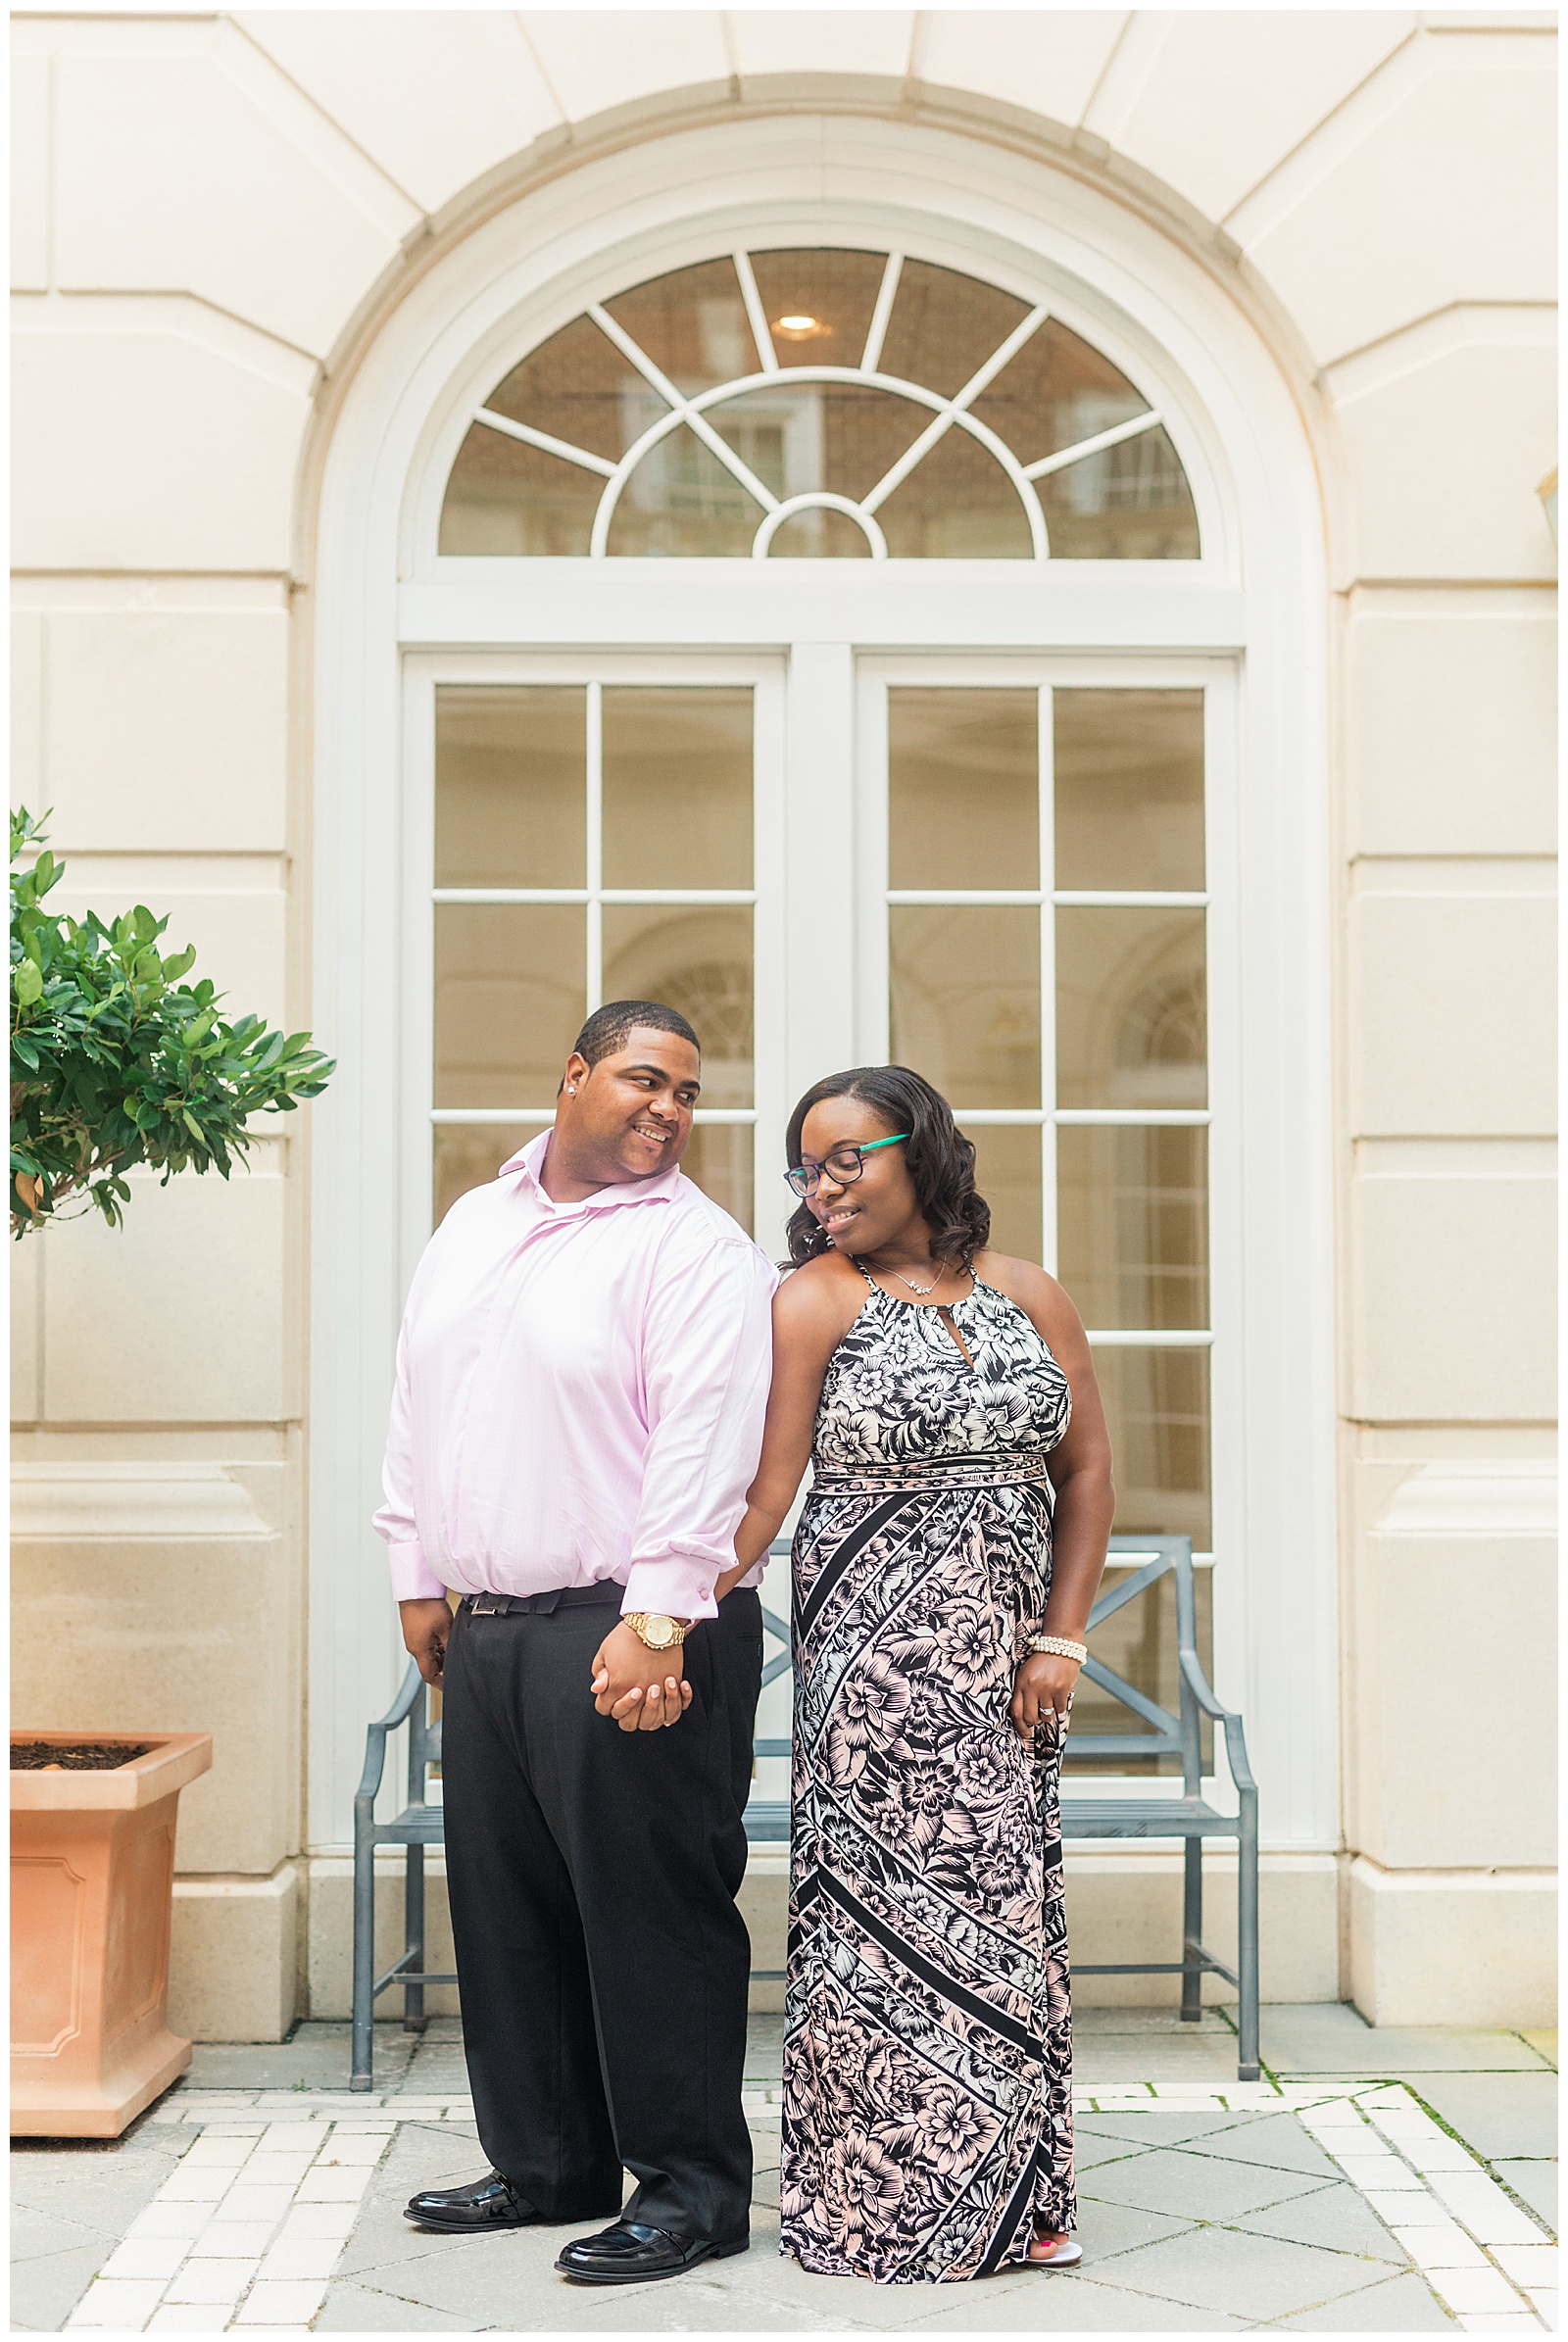 cnu-summer-engagement-session-charneice-kevin-9.jpg